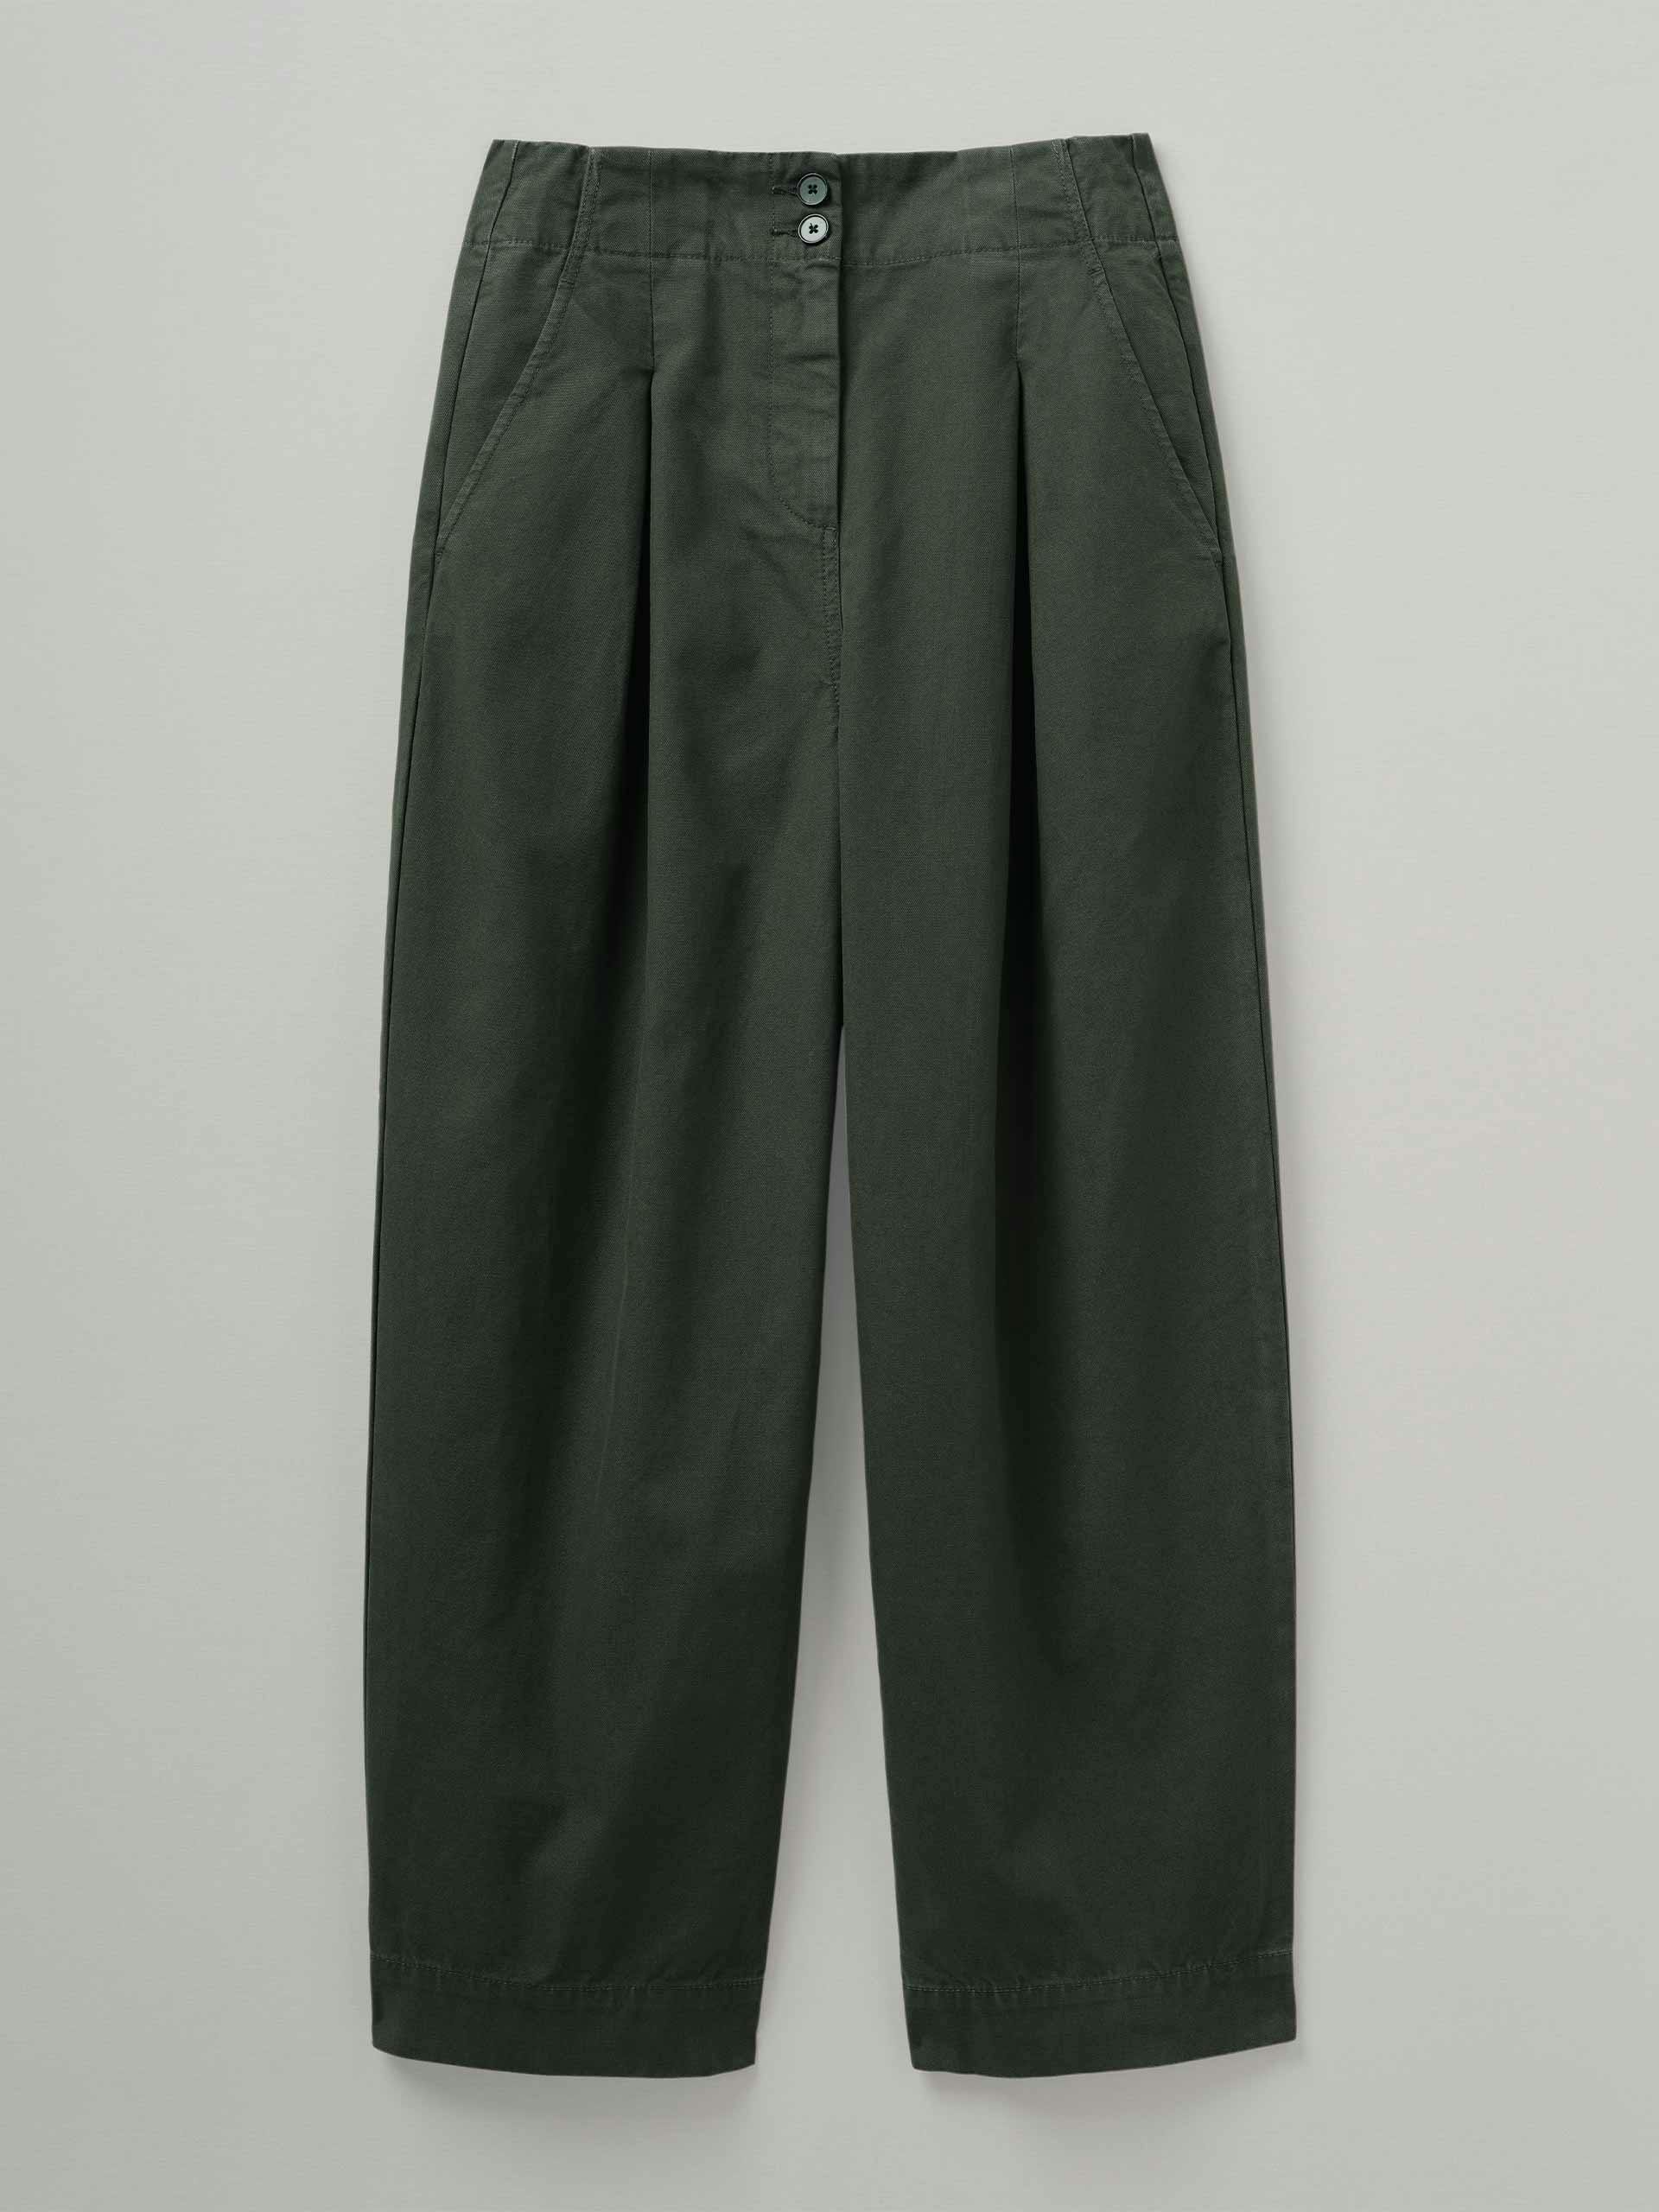 Green canvas utility trousers